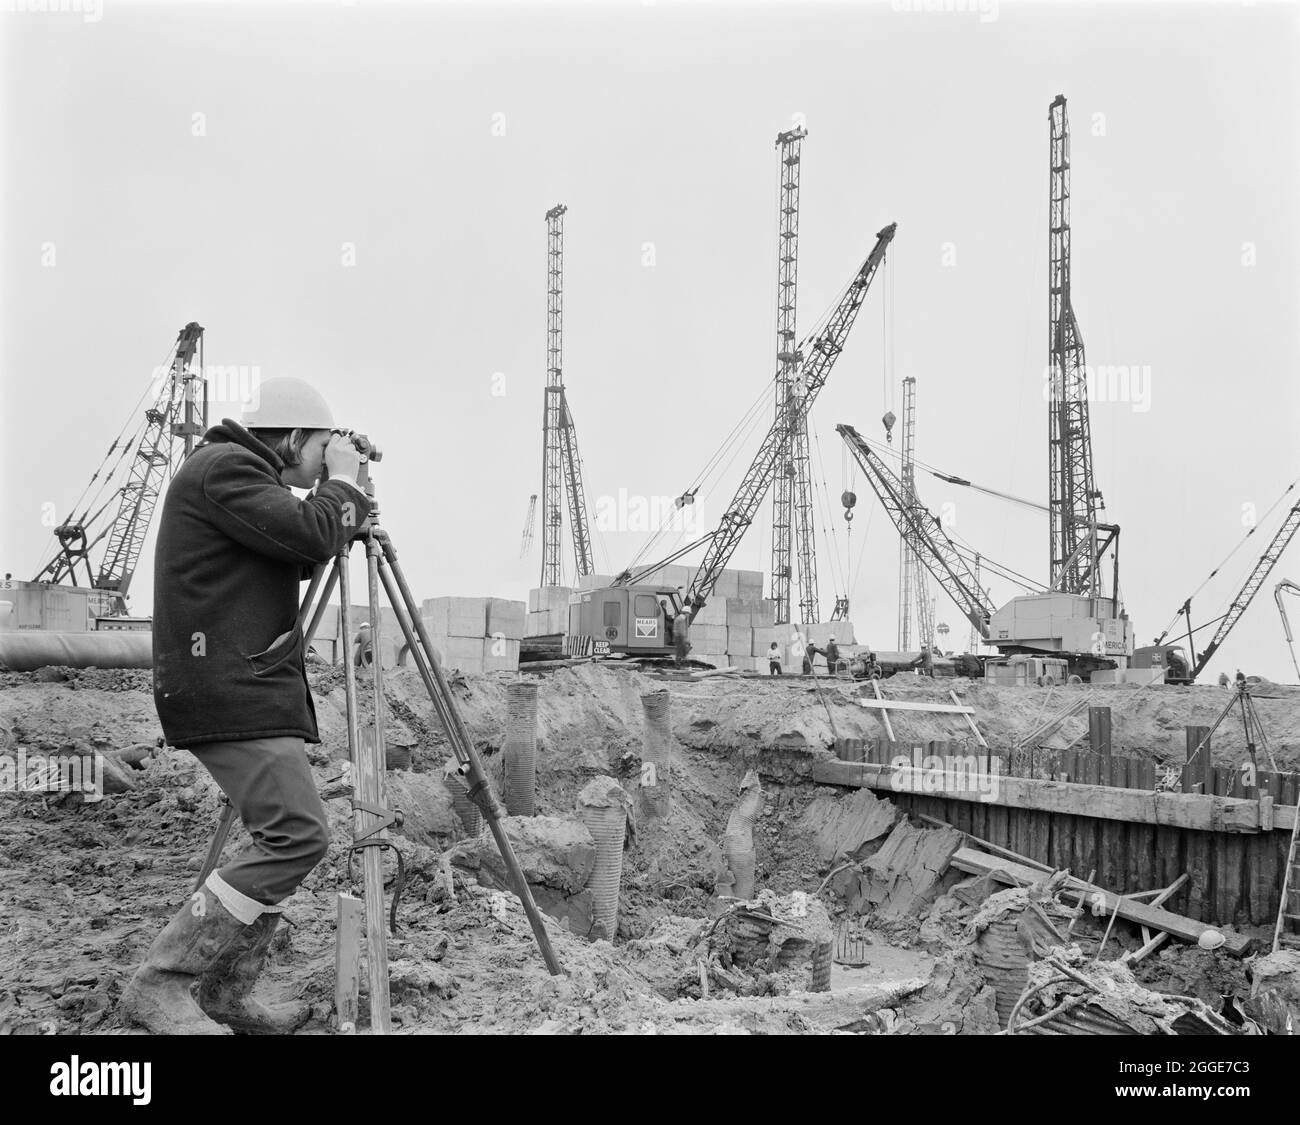 A Laing surveyor using a theodolite on the construction site of the Isle of Grain Power Station. The Isle of Grain Power Station was an oil fired power station built in the 1970&#x2019;s by multiple contractors, including John Laing and Son Ltd. When the power station opened in 1979, it had the second tallest chimney in the UK at 244 metres high. The power station has now been demolished and the chimney was destroyed in September 2016. A new Combined Cycle Gas Turbine (CCGT) power station has been built at the site. Stock Photo